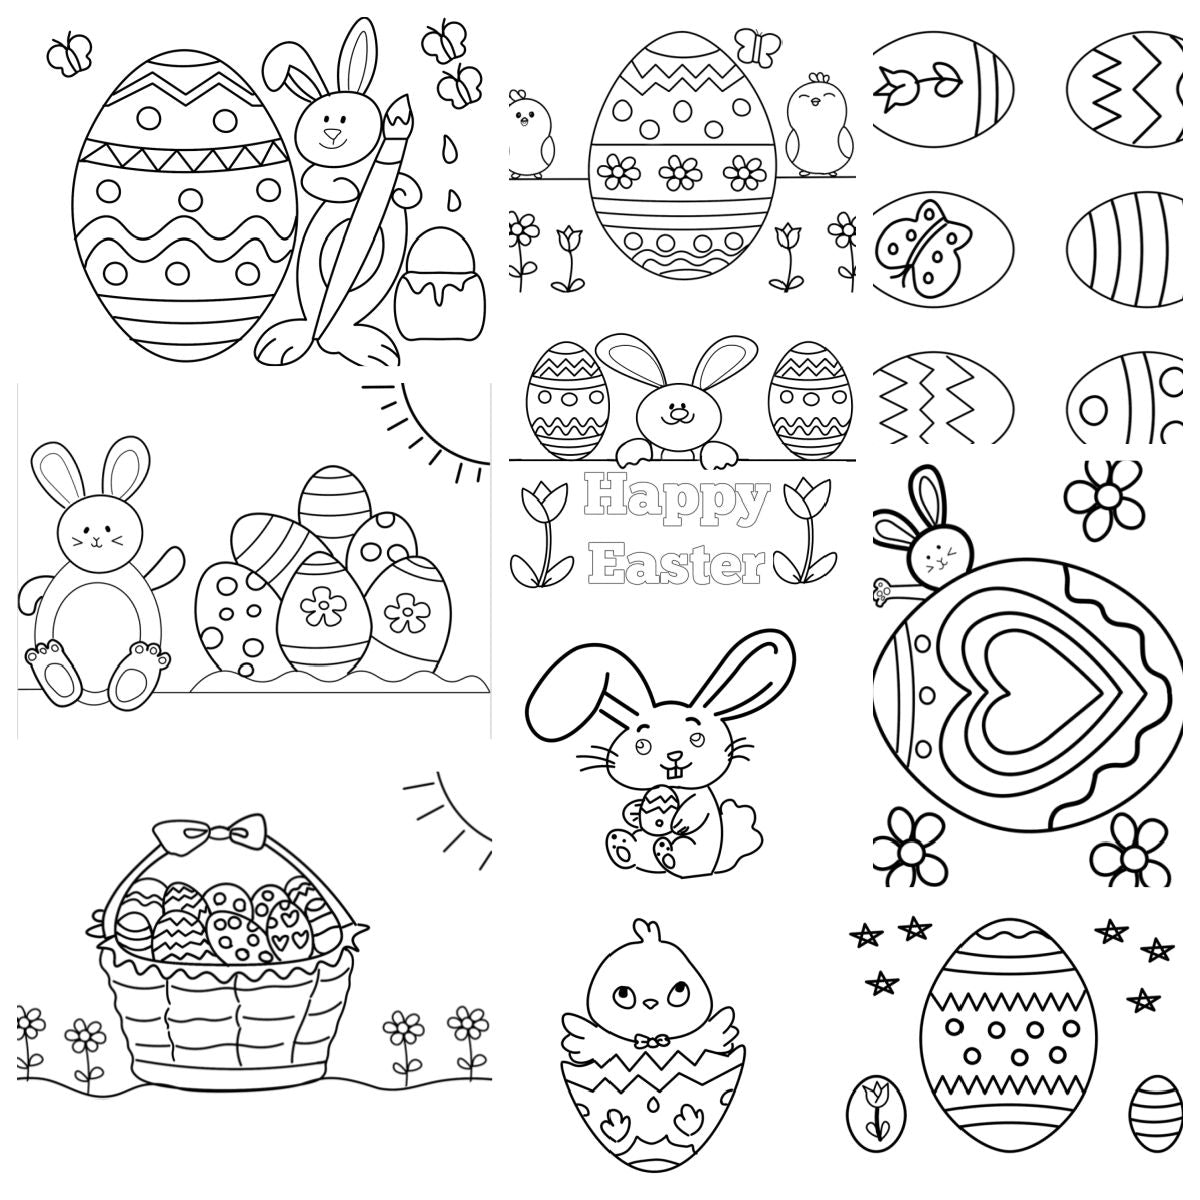 Easter eggs coloring book adults: An Adult Coloring Book Relaxing And  Stress Relieving Adult Coloring pages (Large Print / Paperback)